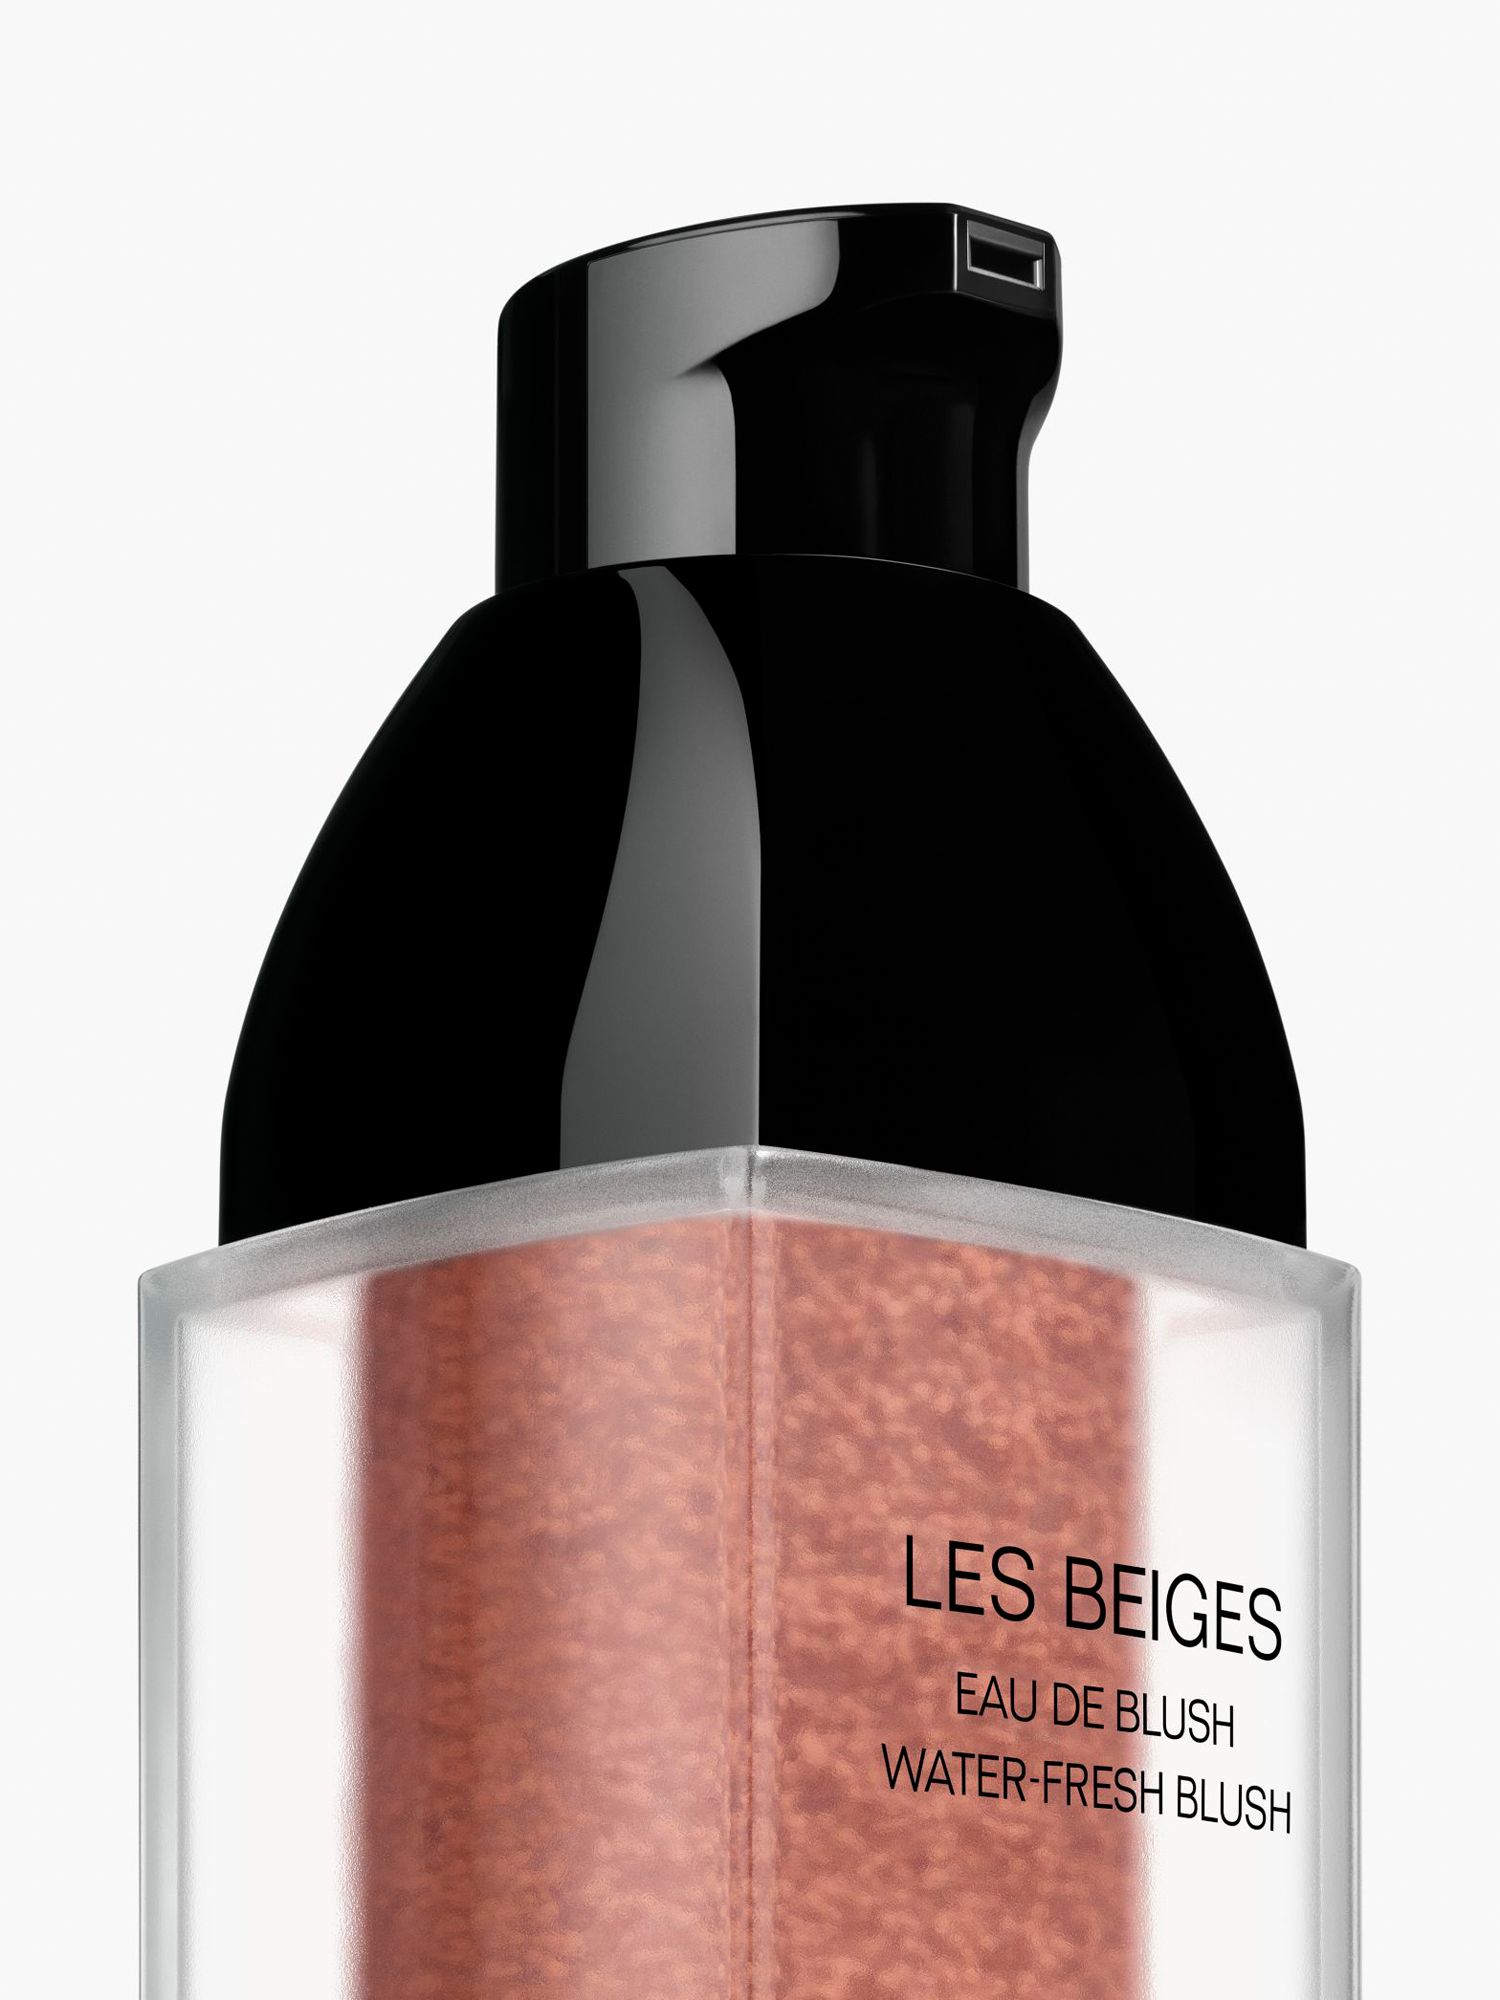 CHANEL, LES BEIGES WATER-FRESH TINT